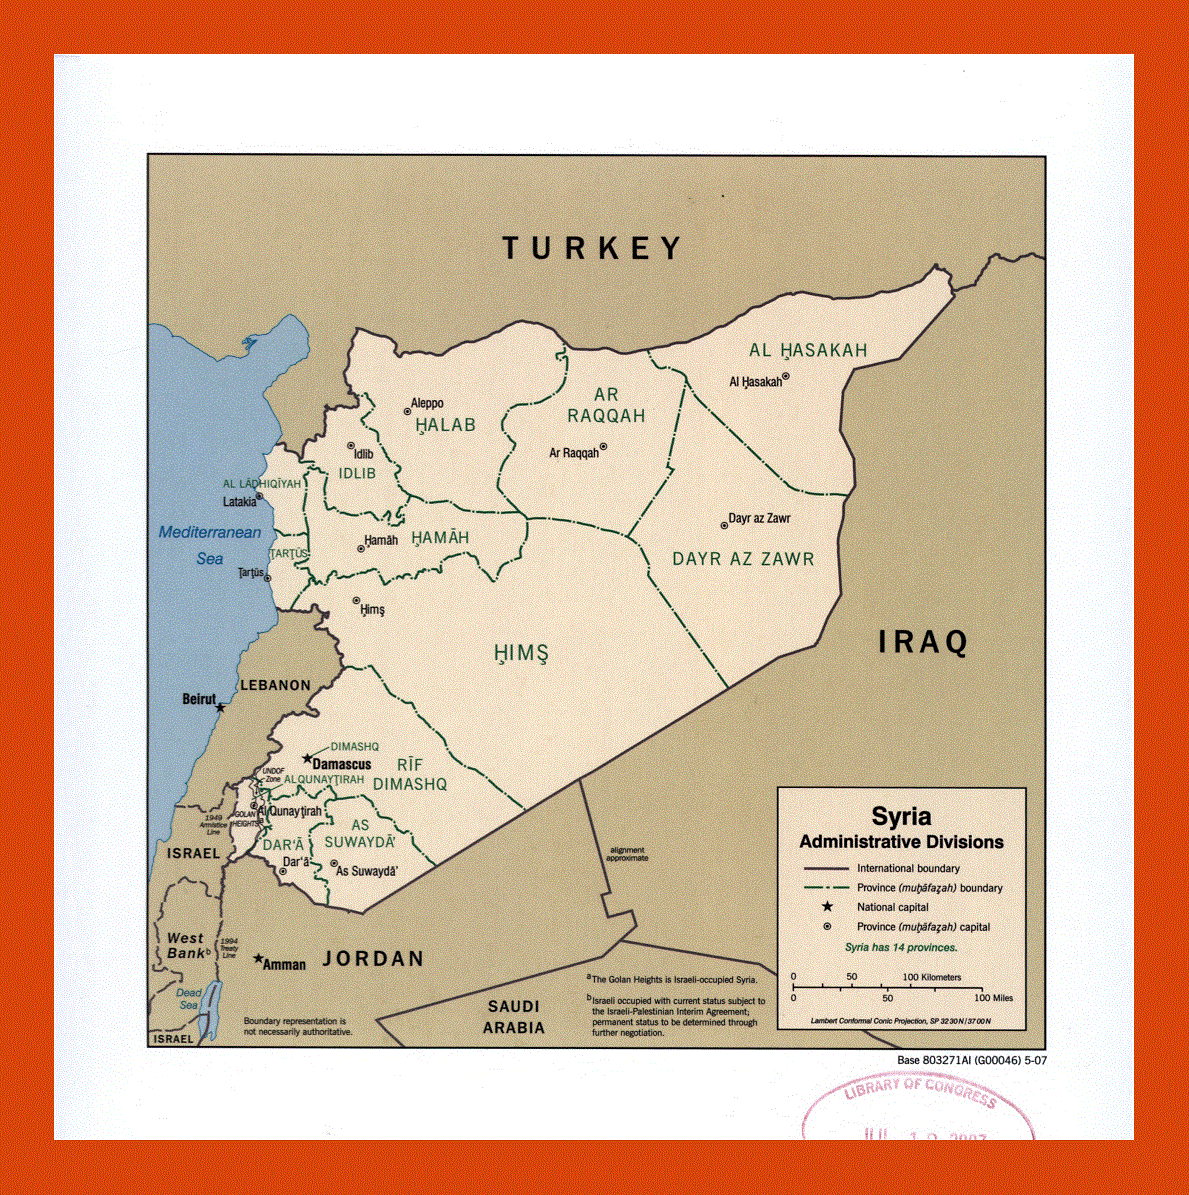 Administrative divisions map of Syria - 2007